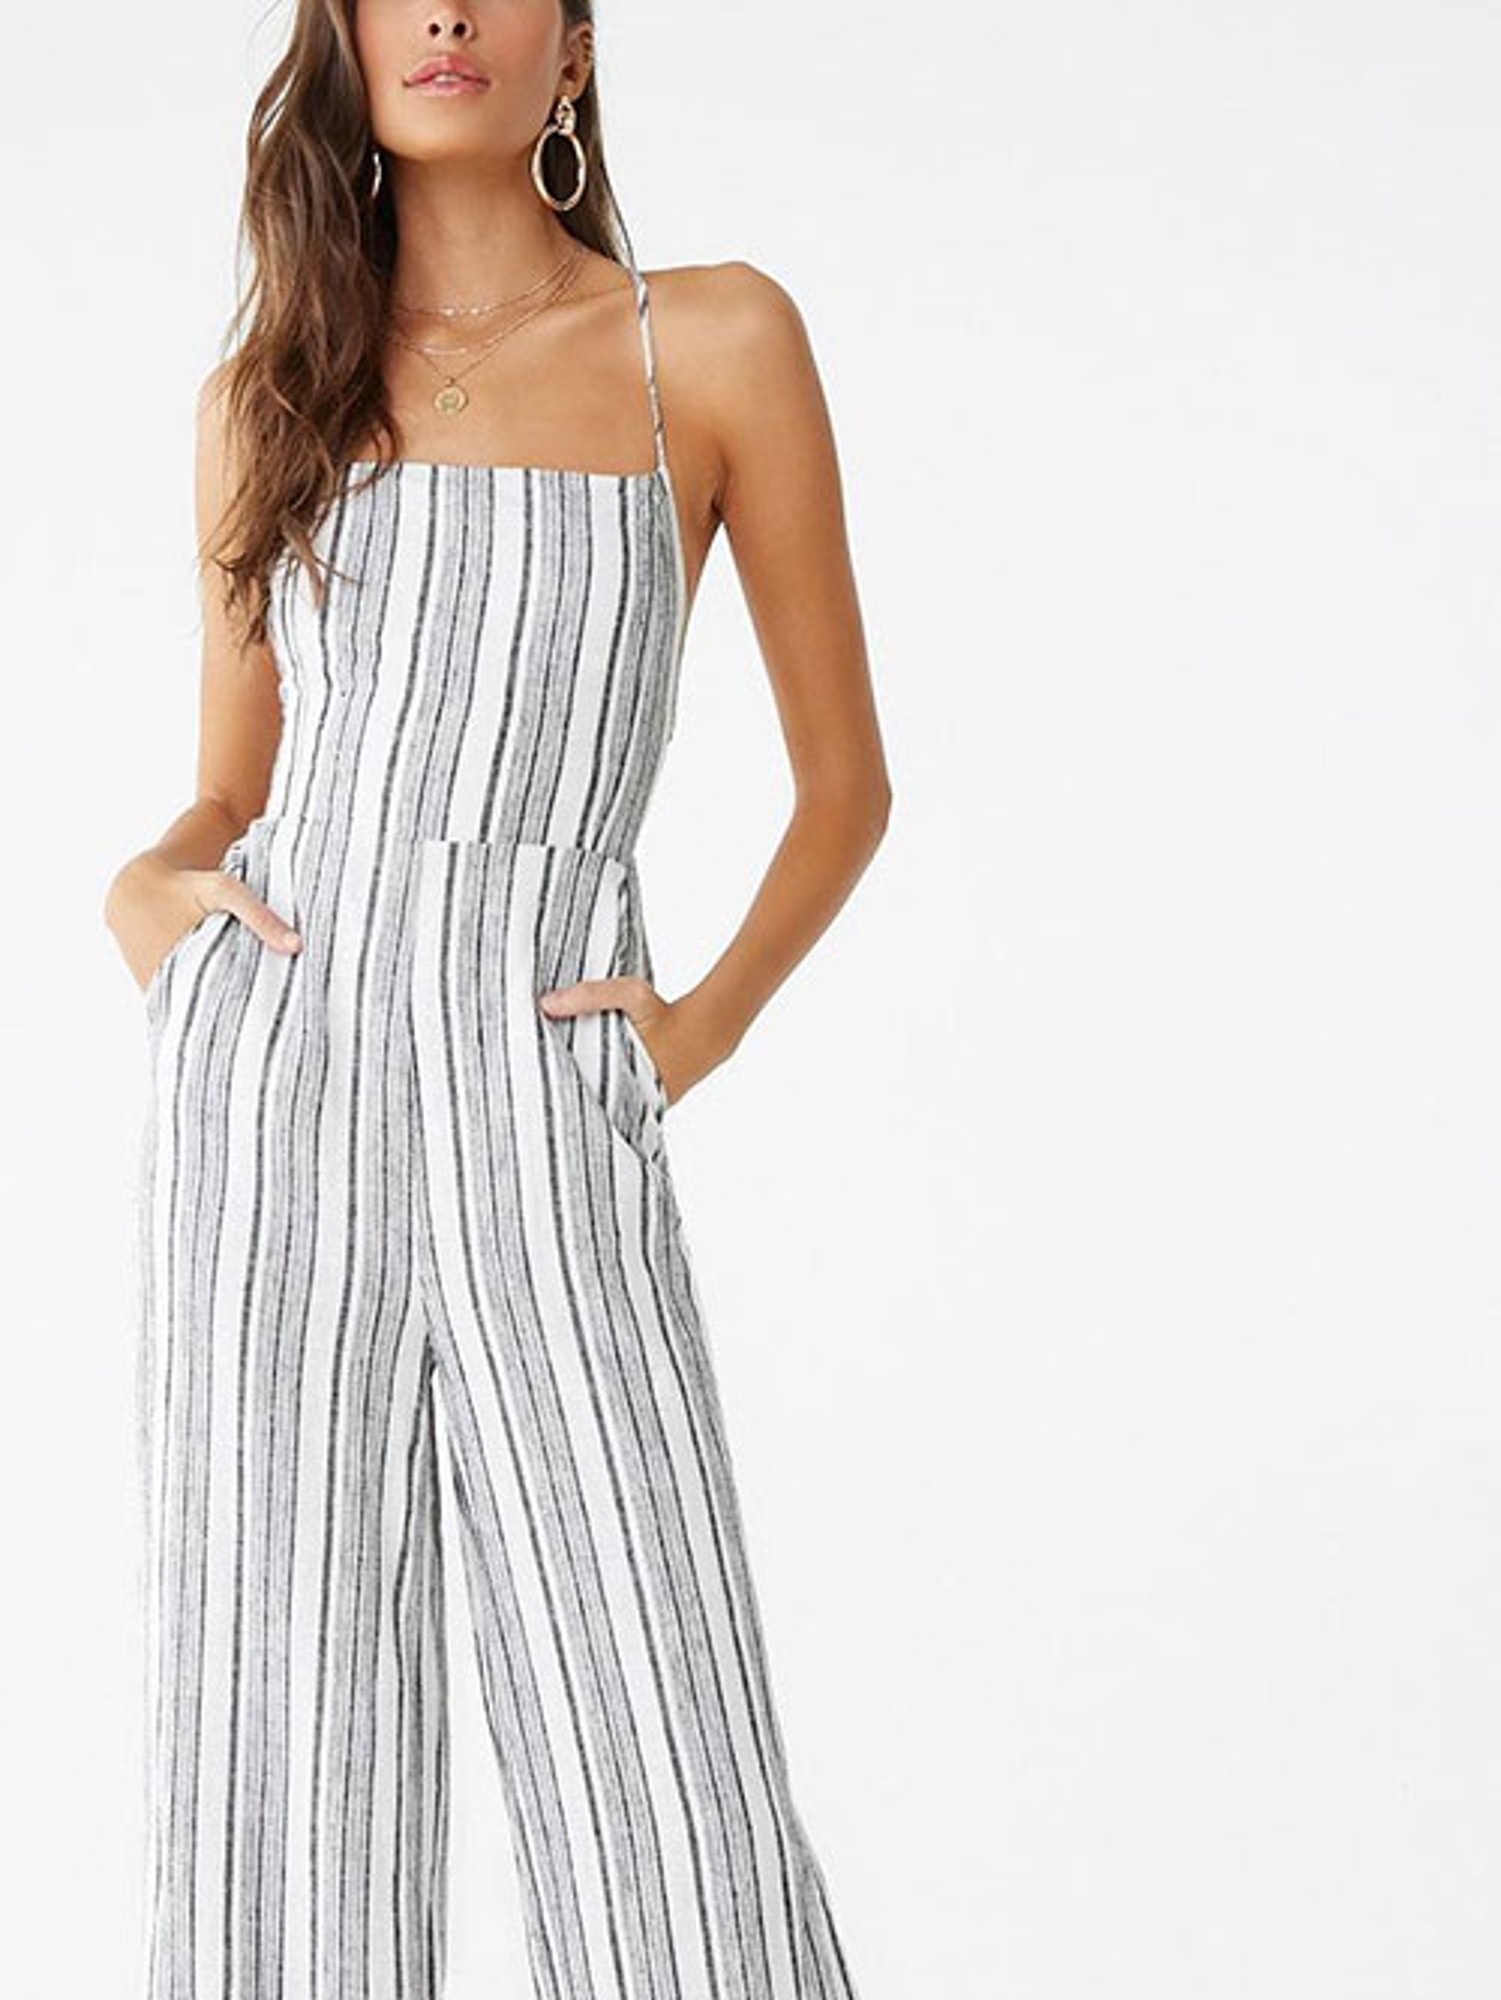 Shop Striped Cami Jumpsuit for Women from latest collection at Forever 21   39563973